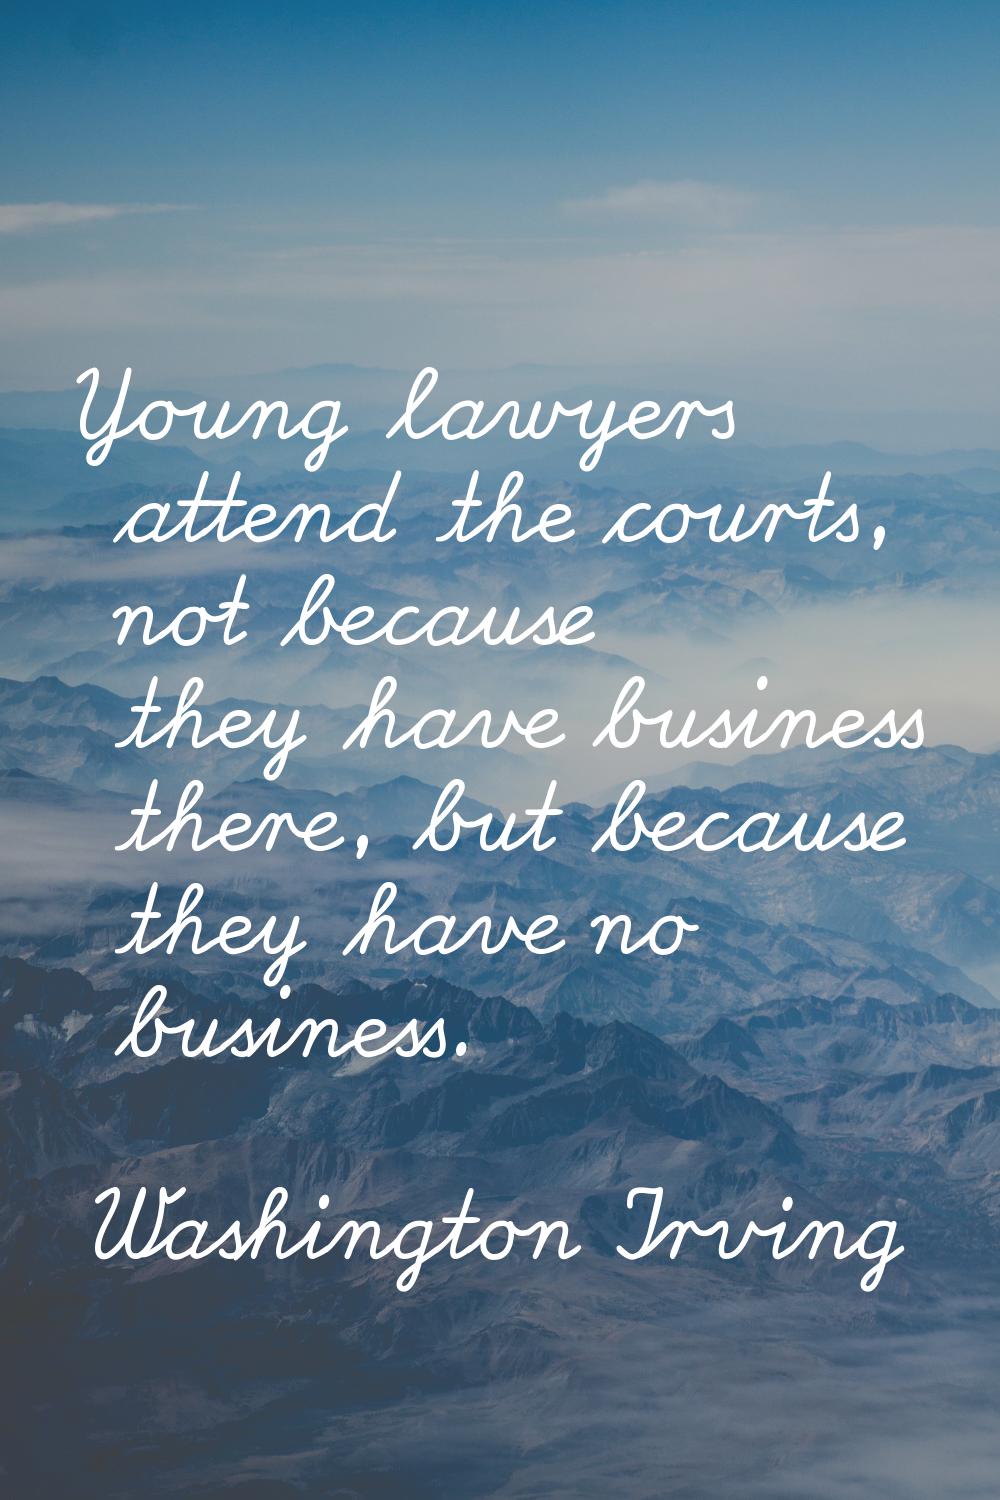 Young lawyers attend the courts, not because they have business there, but because they have no bus